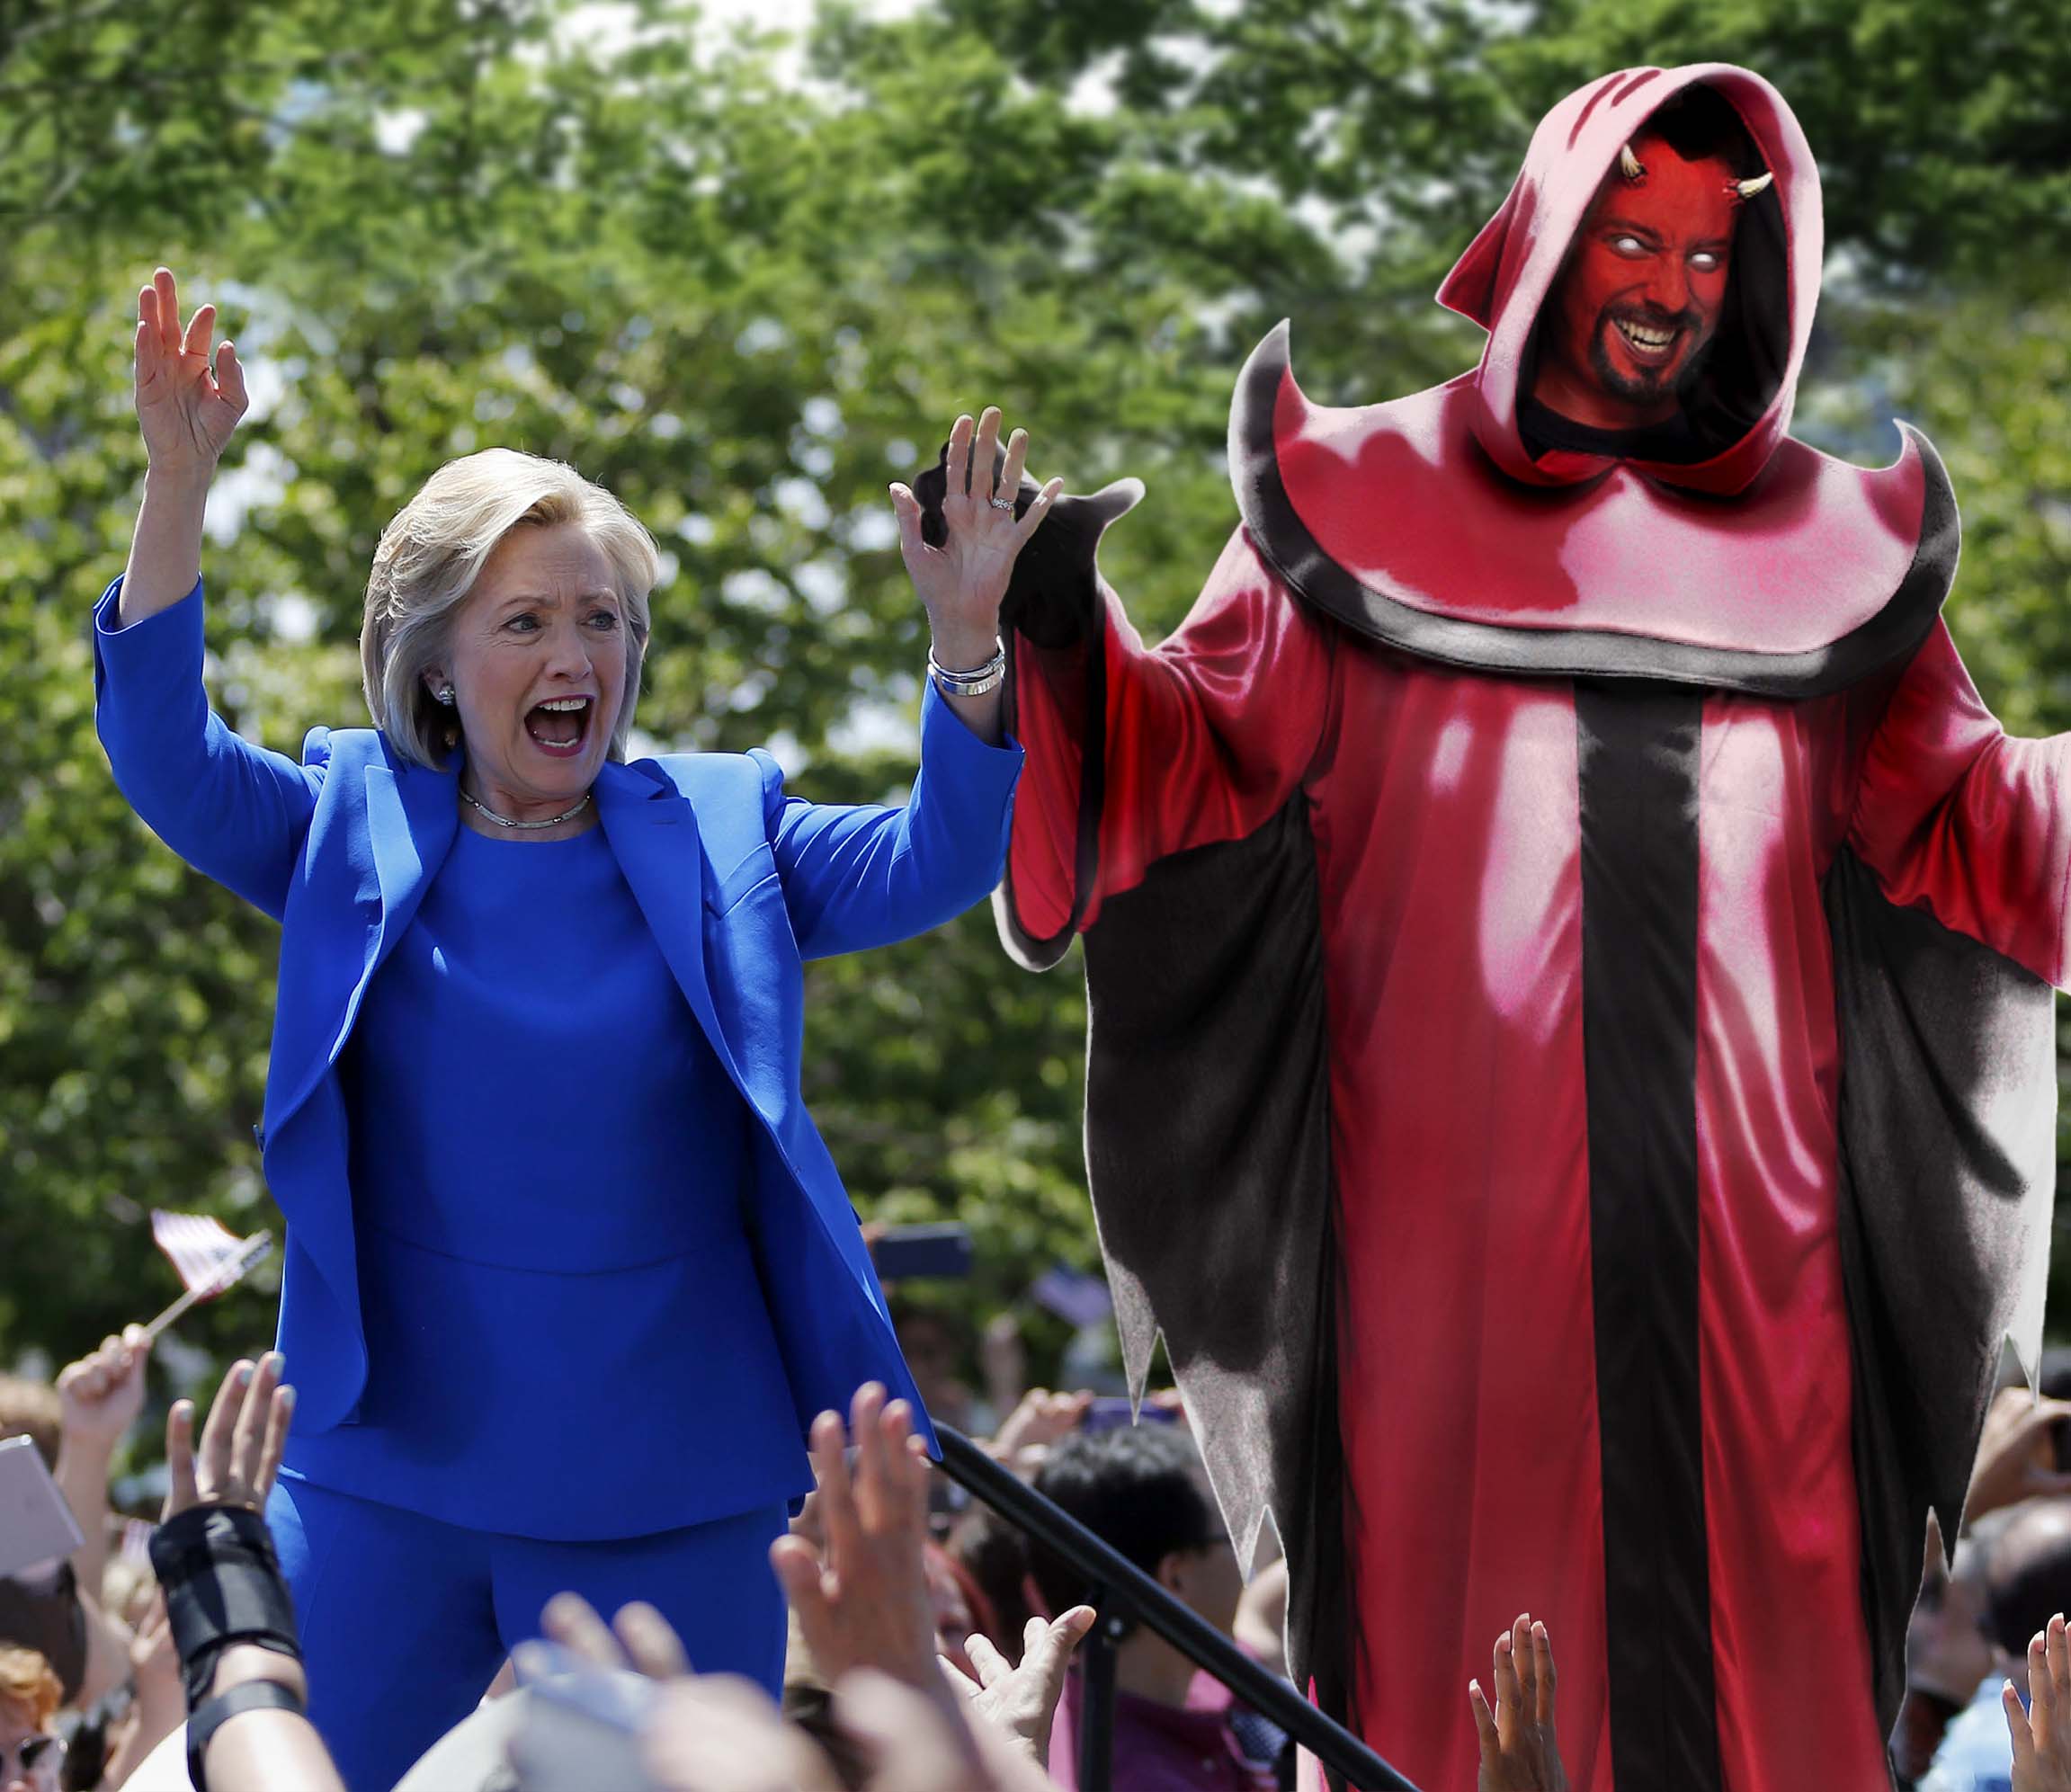 Democratic presidential candidate, former Secretary of State Hillary Rodham Clinton arrives to speak to supporters Saturday, June 13, 2015, on Roosevelt Island in New York. (AP Photo/Julio Cortez)